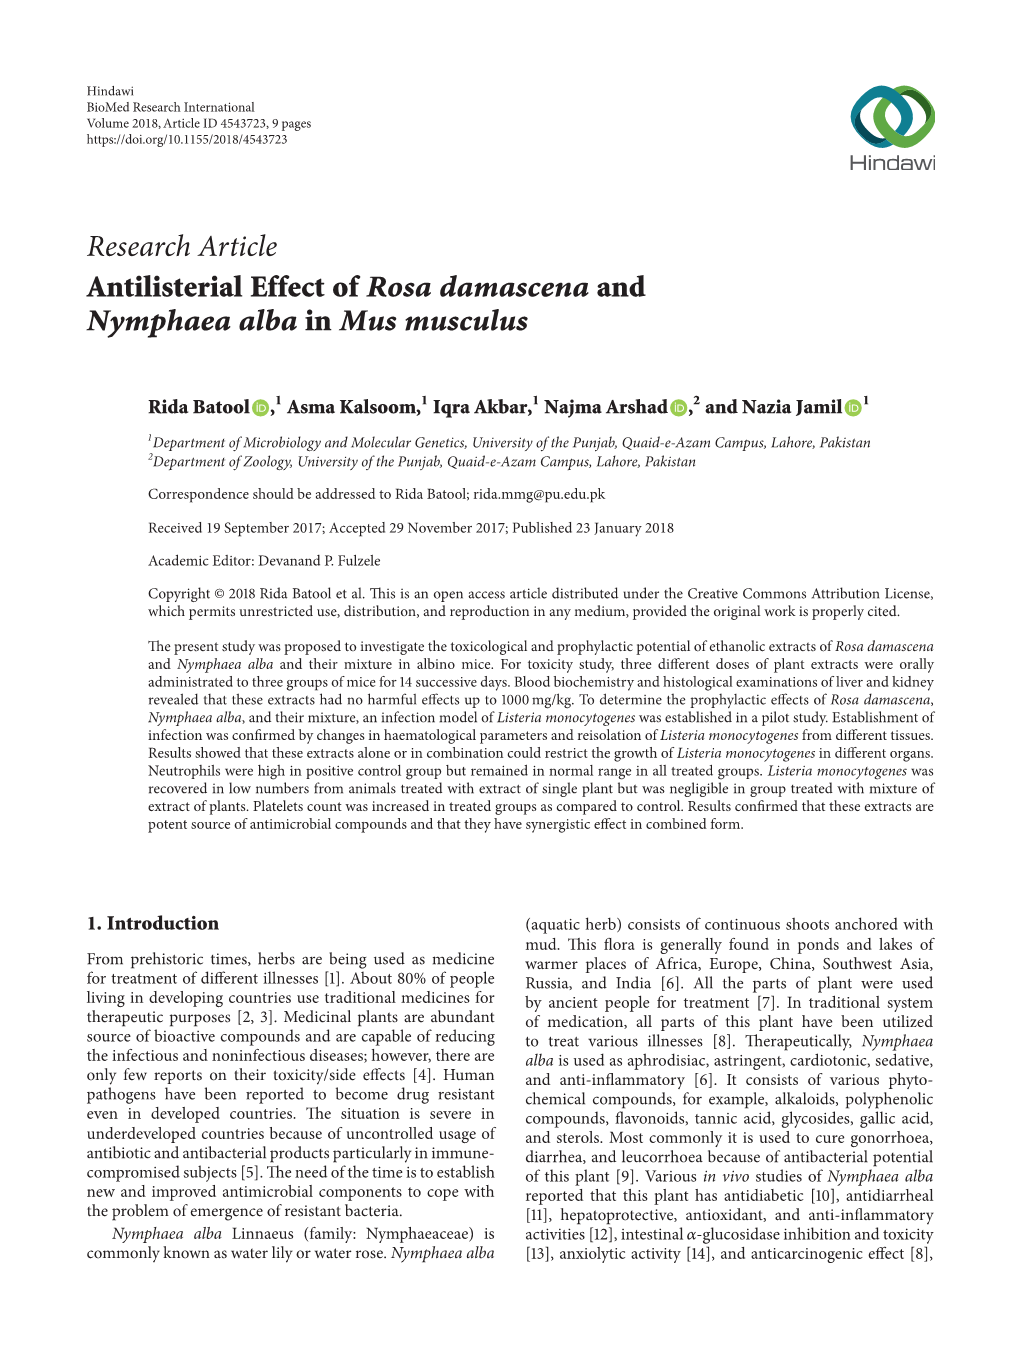 Antilisterial Effect of Rosa Damascena and Nymphaea Alba in Mus Musculus